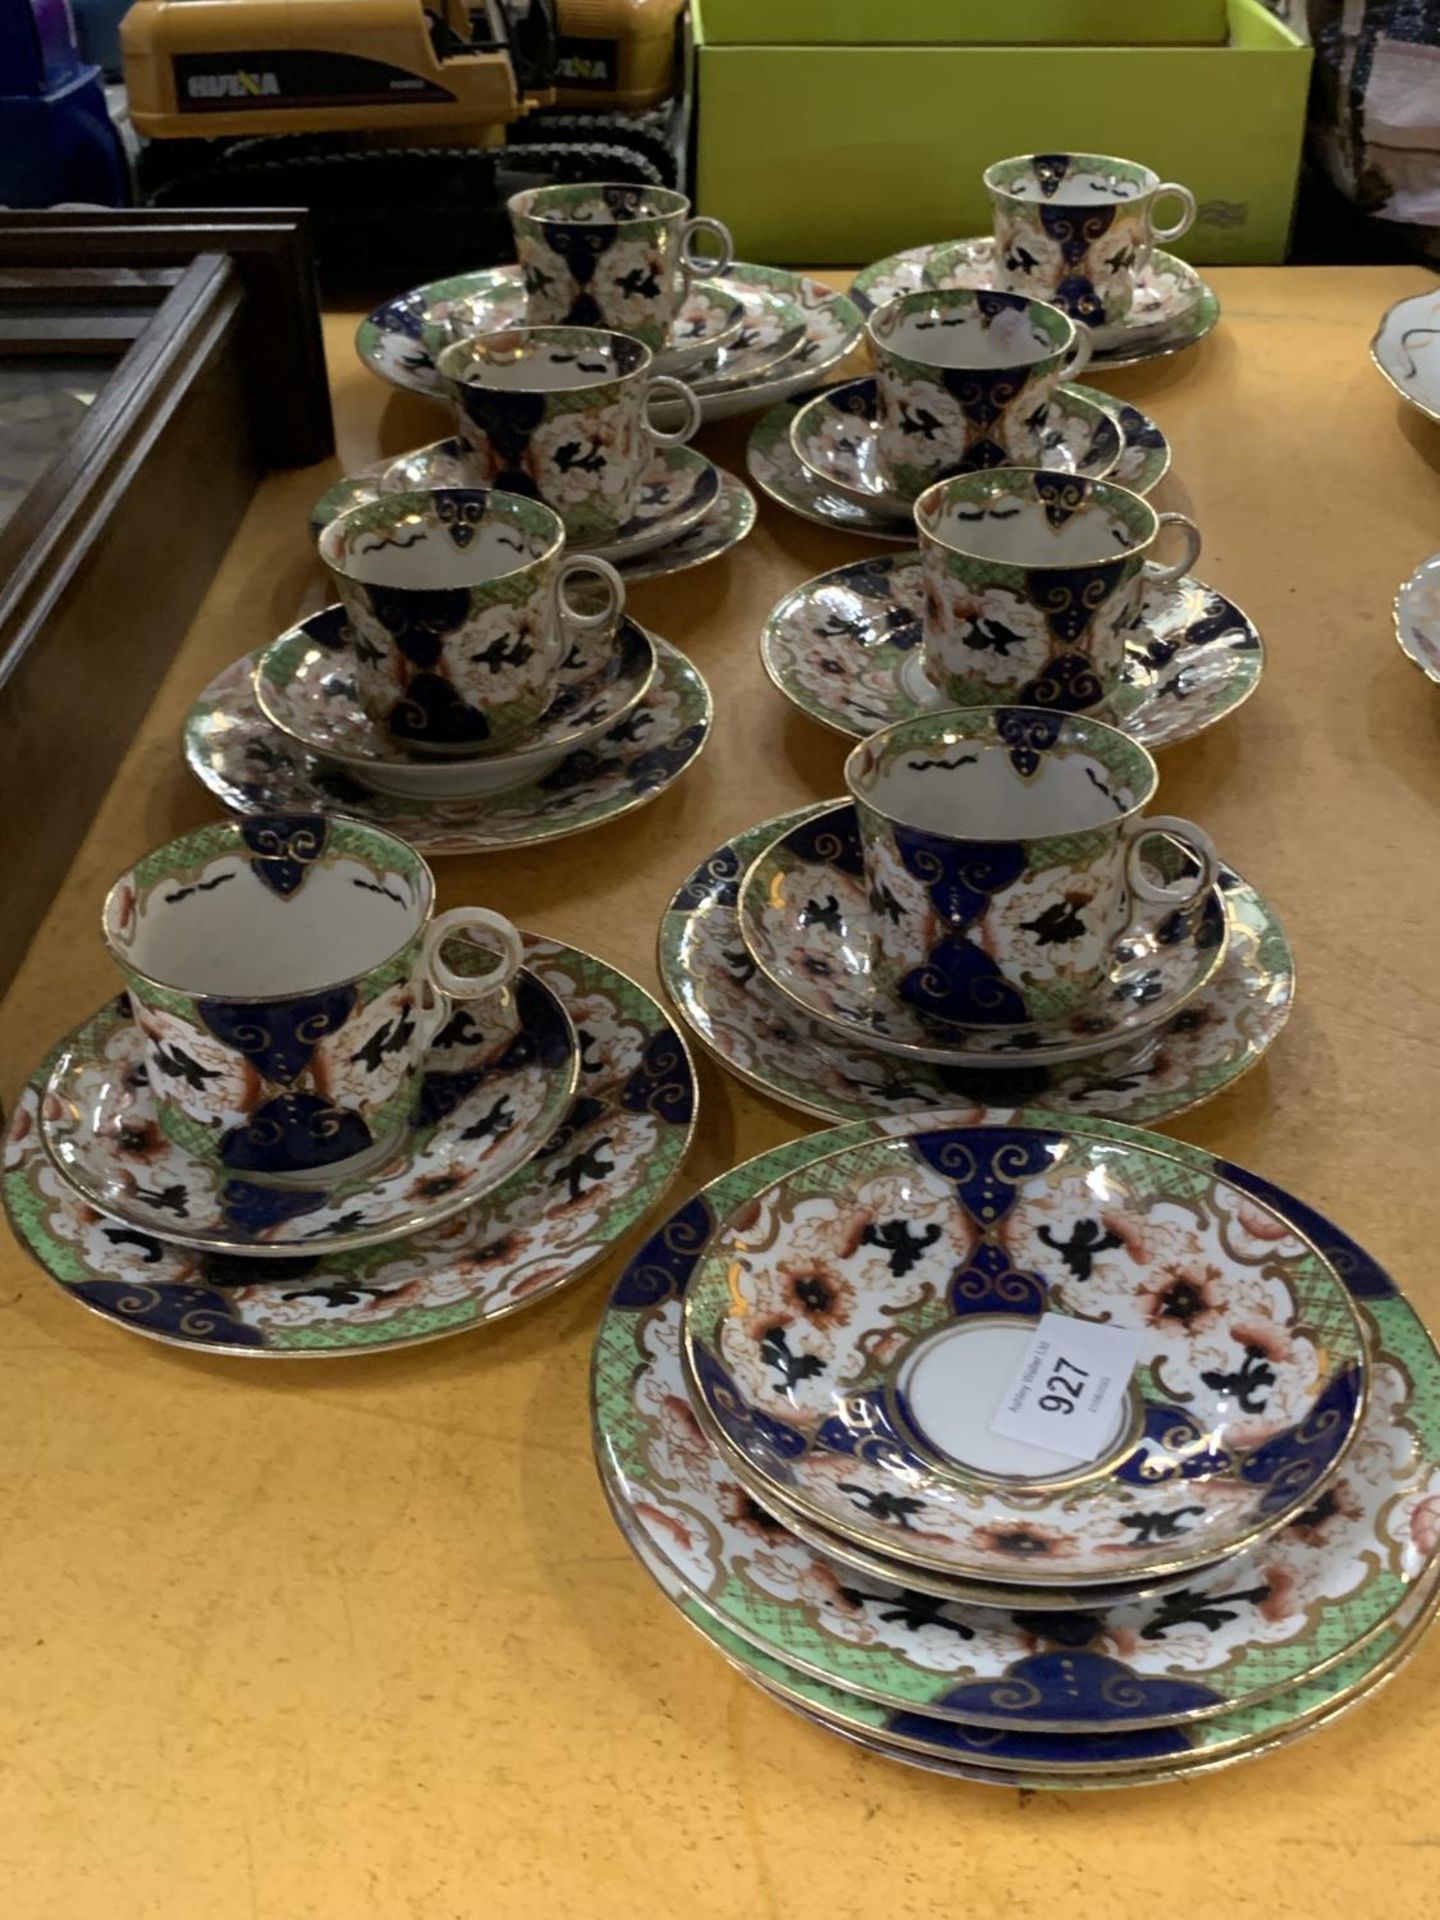 A COLLECTION OF VINTAGE ROYAL STAFFORD CUPS, SAUCERS AND SIDE PLATES - Image 2 of 3